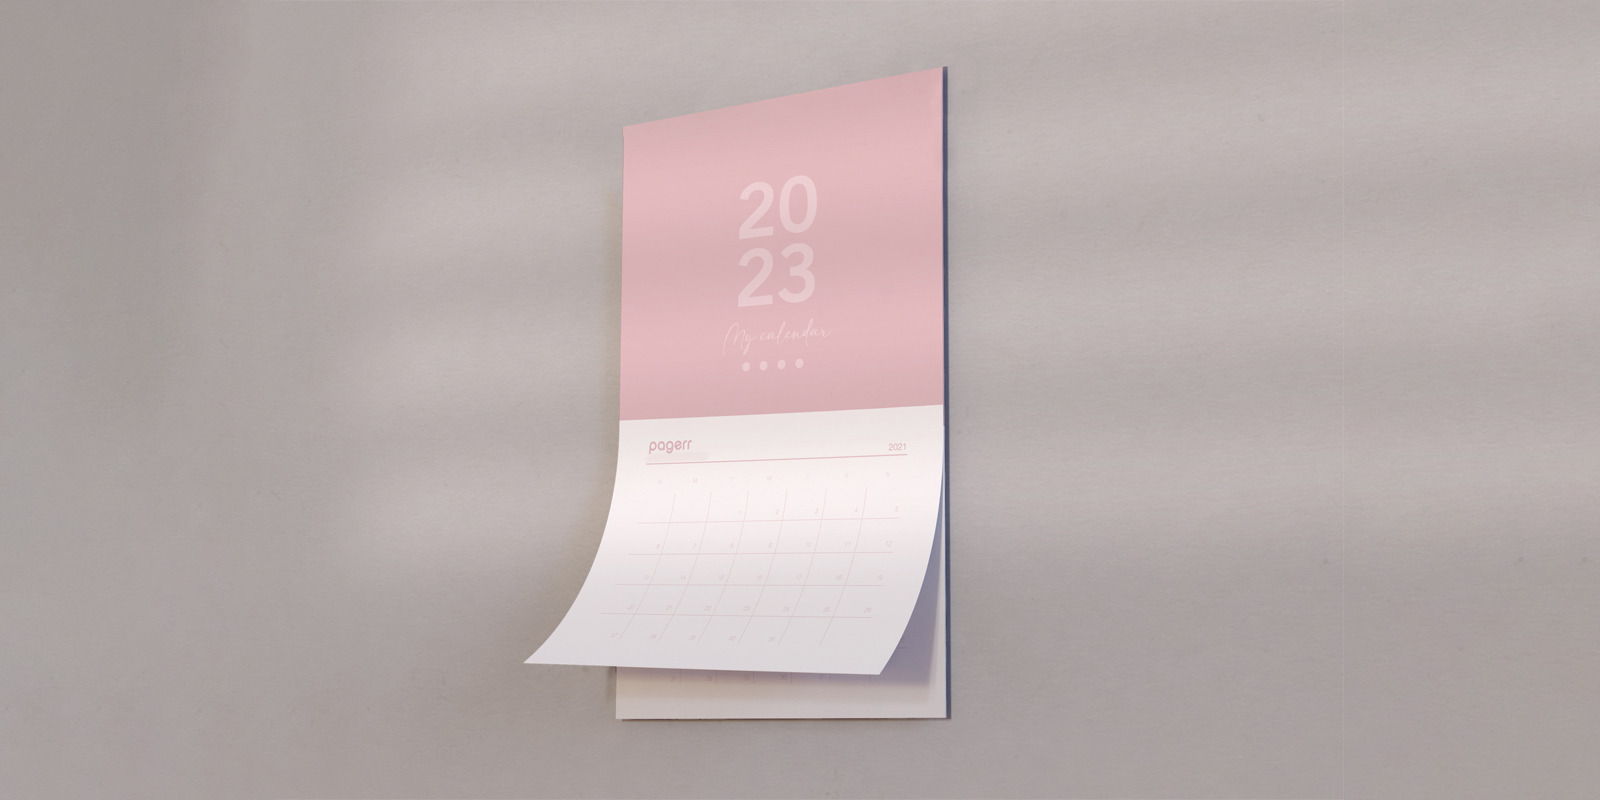 Magnetic calendars in Perth - Print with Pagerr